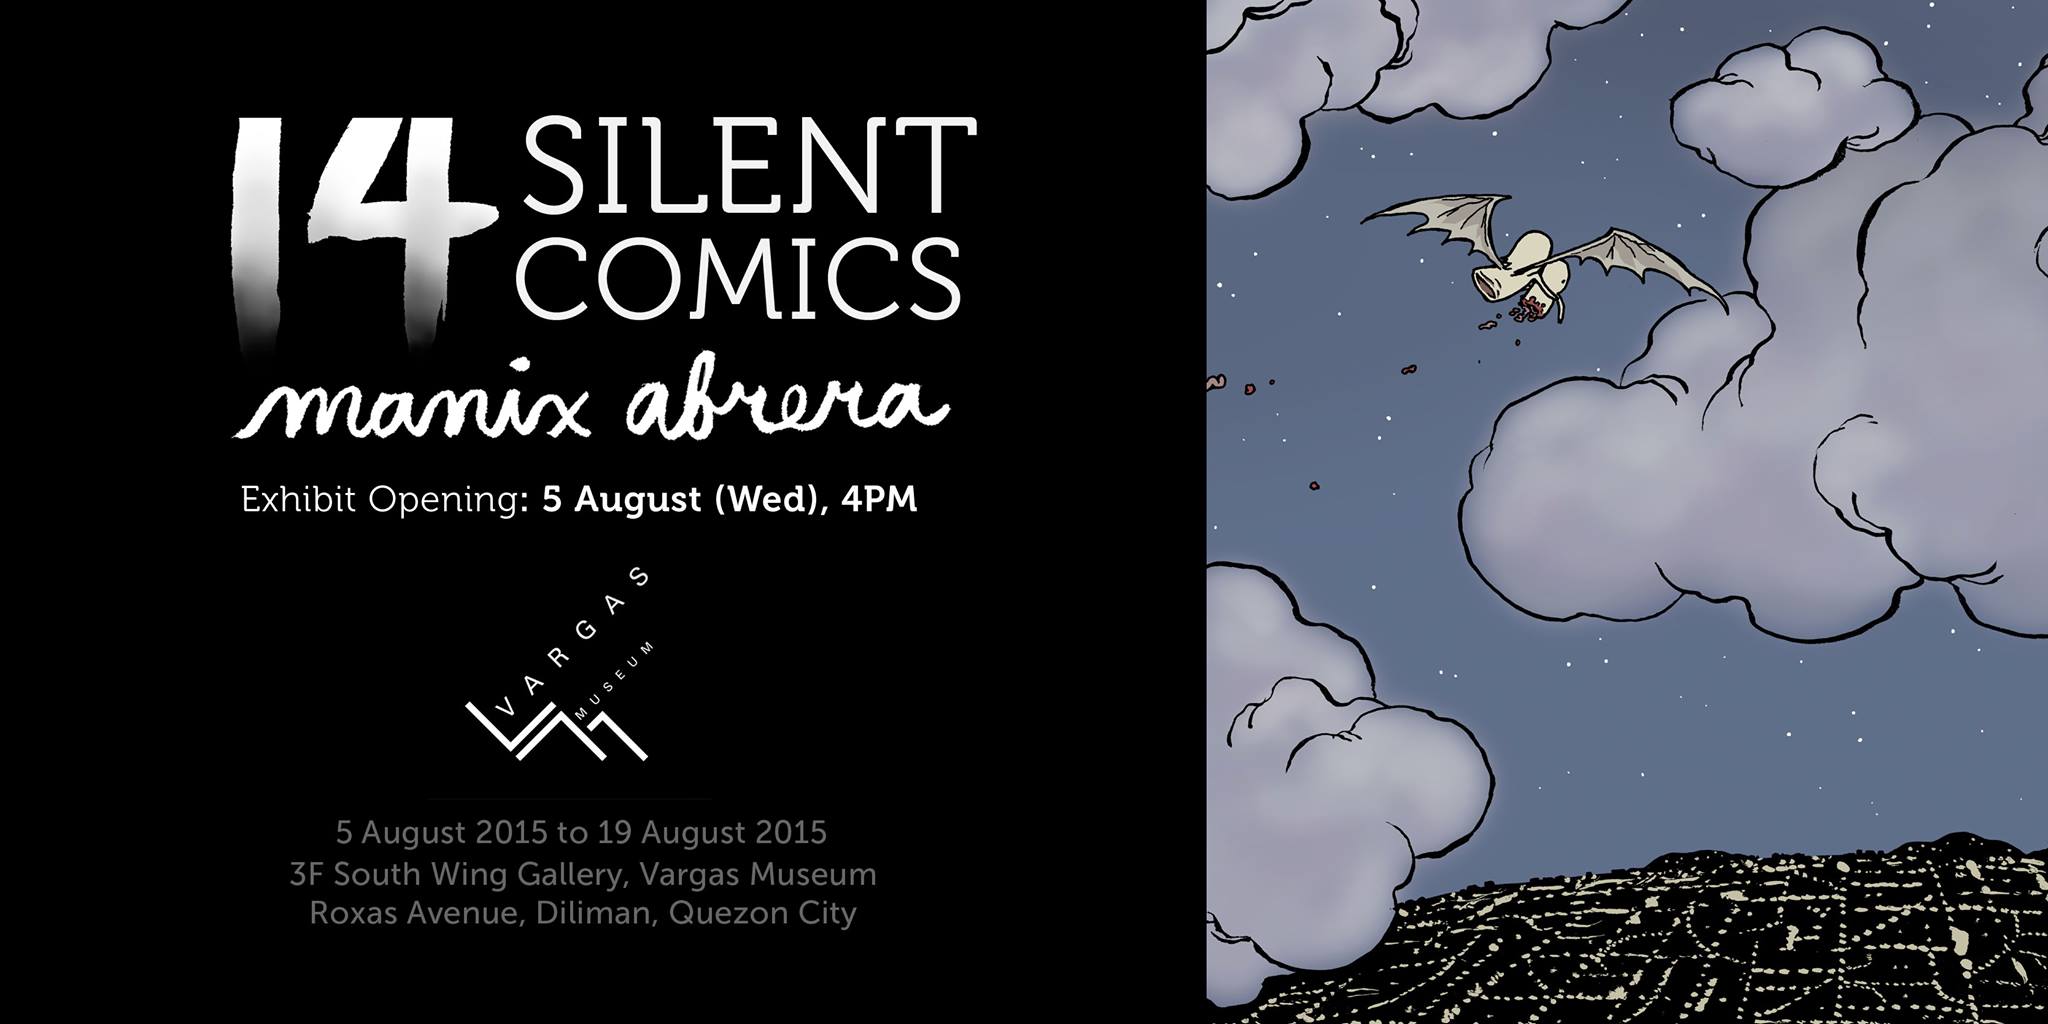 14 Silent Comics | Manix Abrera     August 5 - August 19     Aug 5 at 4:00pm to Aug 19 at 5:00pm     	     Show Map     UP Vargas Museum     University of the Philippines, 1101 Diliman, Quezon City, Philippines UP Vargas Museum presents Manuel “Manix” Abrera’s 14 Silent Comics on August 5, Wednesday at 4pm. 14 Silent Comics is Manuel “Manix” Abrera’s one-person exhibition that presents his silent comics (comics without dialogue). Characters from Philippine mythology like the manananggal, white lady, duwende and kapre will be portrayed in a different light through stories that cast them as protagonists. They are either funny or philosophical, caught up in circumstances where they meet different creatures, mortal and otherwise. The exhibit runs until August 19. Manuel “Manix” Abrera (b. 1982) received his bachelor’s degree from the College of Fine Arts at the University of the Philippines, Diliman in 2003 and is presently doing his Masters on the same university. Known for his award-winning Kikomachine Komix publications, Abrera has been exposed to work in the field of editorial cartoons and comic series. He has given talks and workshops in universities and organizations, and has exhibited in different art institutions including Pablo Gallery (twice in 2010), Manila Contemporary (2011), Vargas Museum (2014) and Erehwon Center for the Arts (2014). For more information, please contact Vargas Museum at (+632) 928-1927 (direct line), (+632) 981-8500 loc. 4024 (UP trunkline), (+632) 928-1925 (fax) or send an e-mail to vargasmuseum@gmail.com. You may also check our website at http://vargasmuseum.upd.edu.ph/ or like us at http://www.facebook.com/vargasmuseum.upd and follow us @UPVargasMuseum for updates.